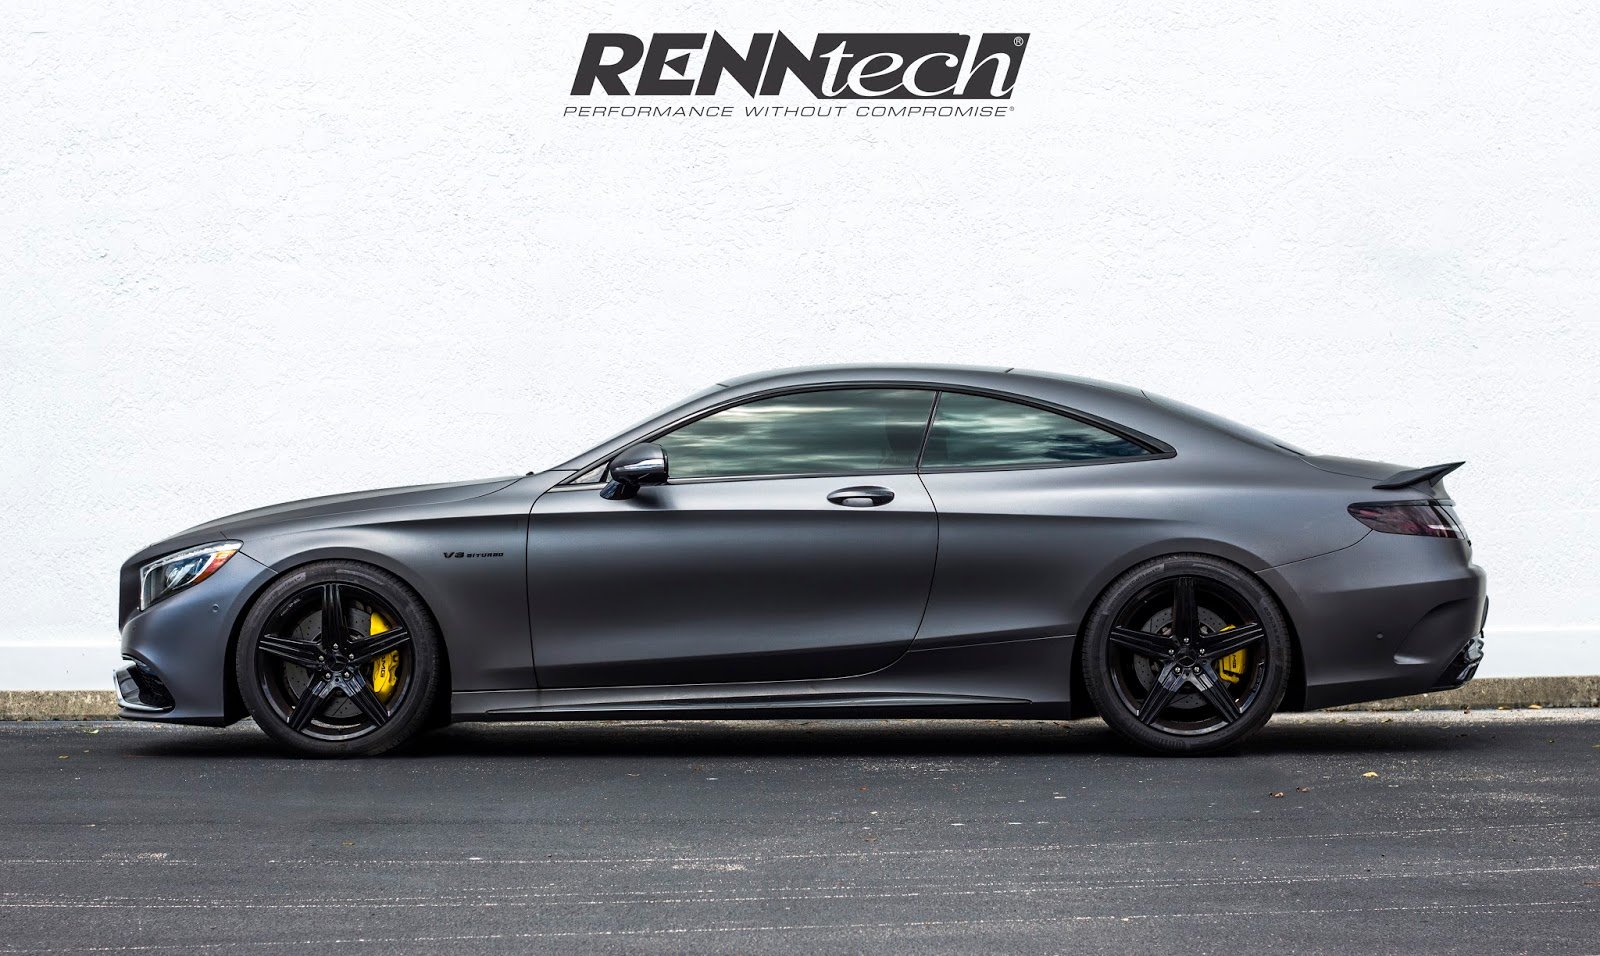 mercedes, Amg, S63, Coupe, Cars, Modified, Renntech Wallpaper